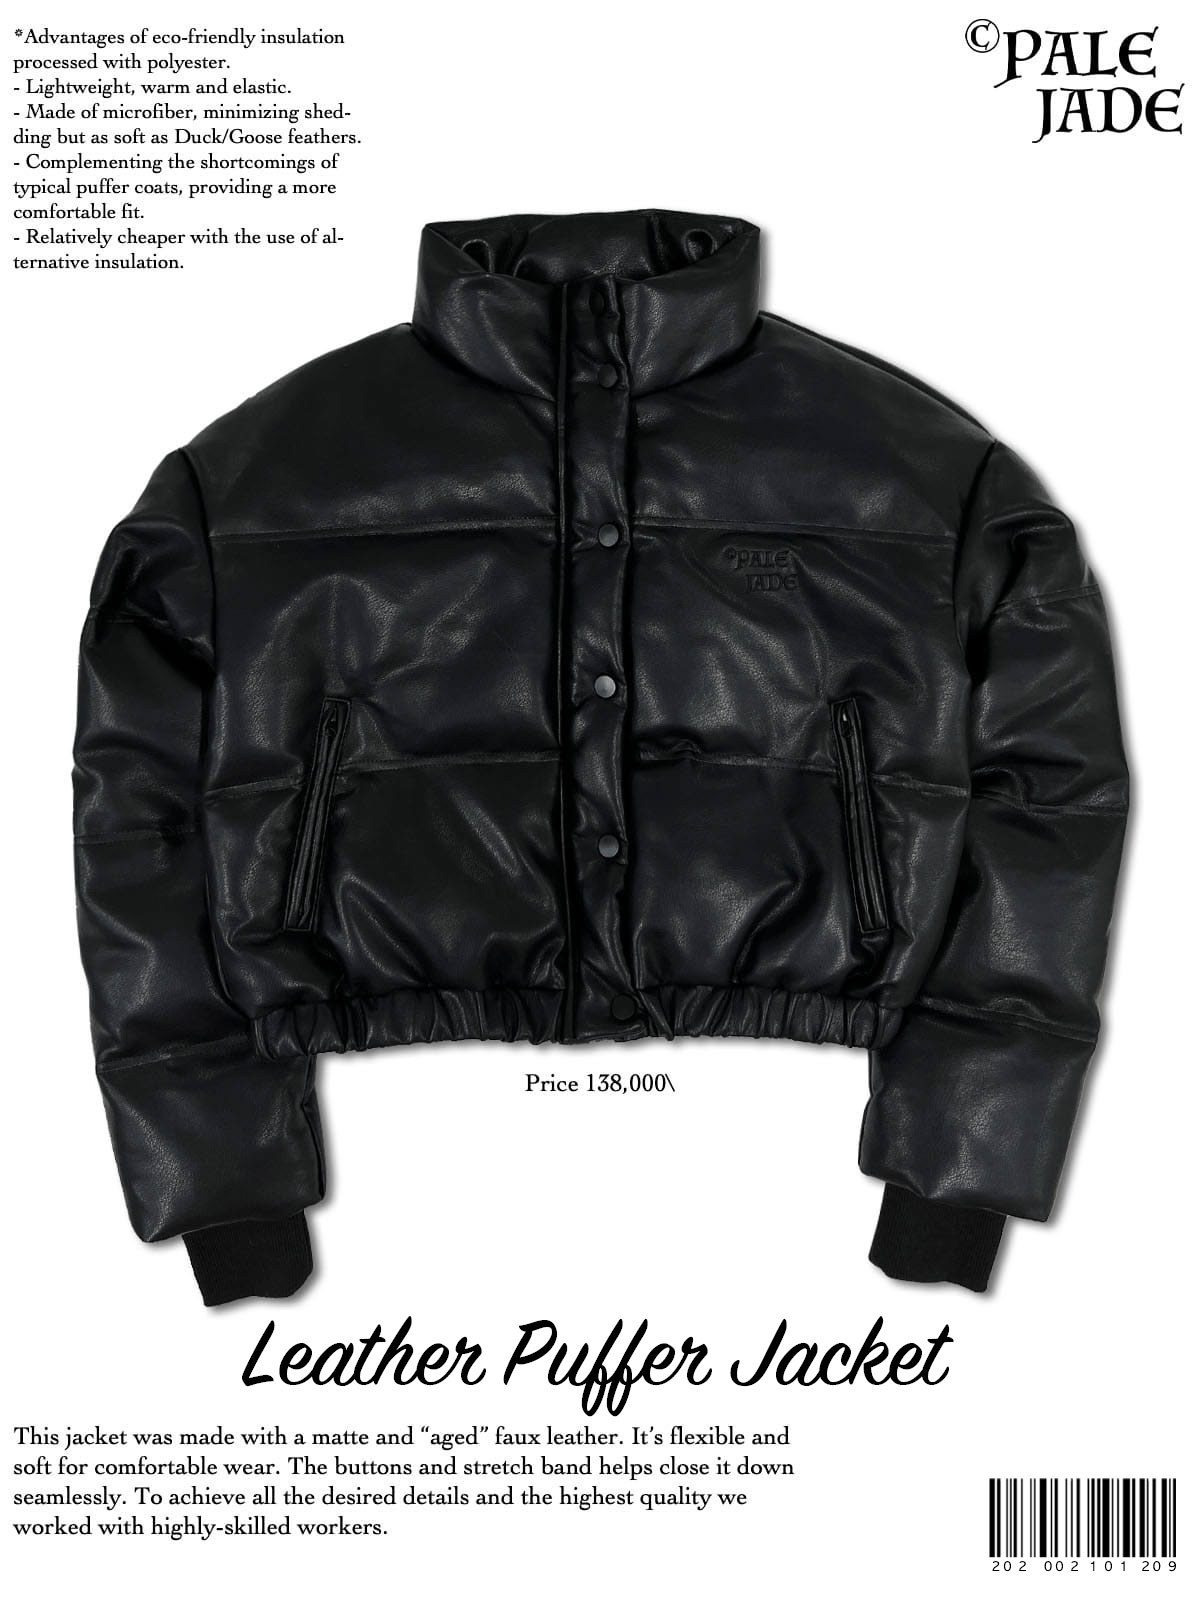 Leather Puffer Jacket in BLACK